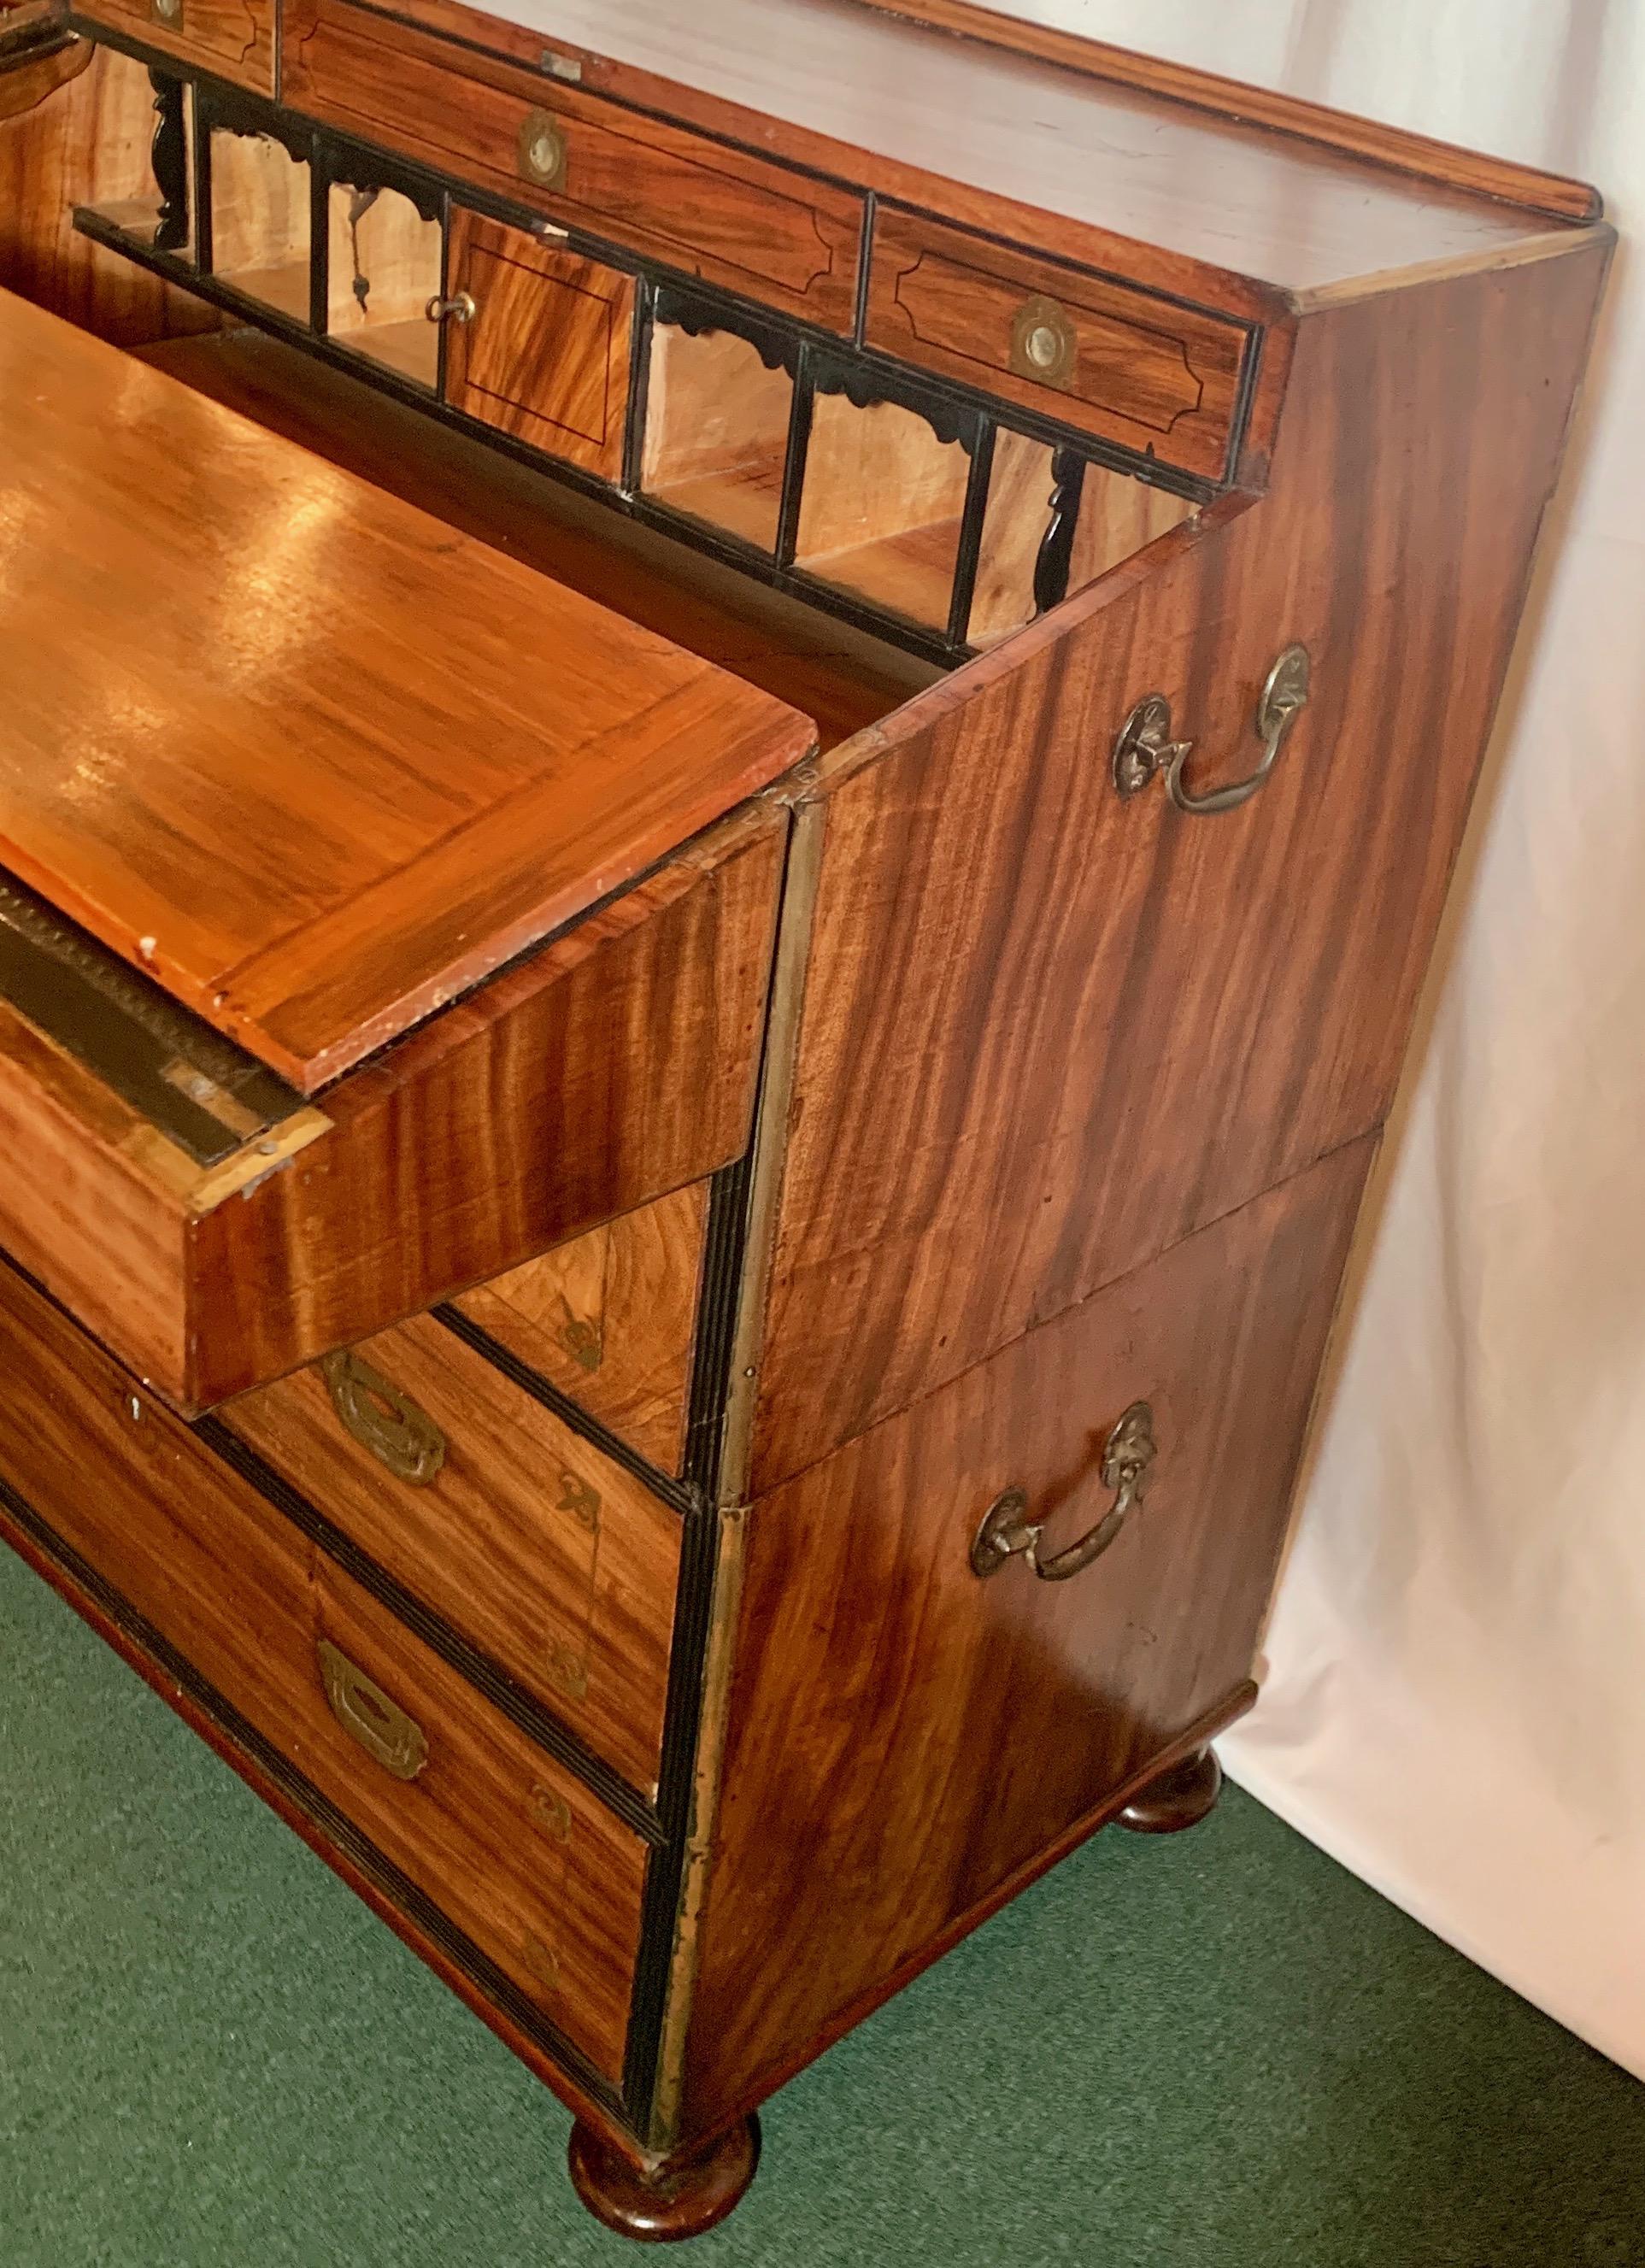 Extremely Rare Antique Regency Period Campaign Chest with Desk In Good Condition For Sale In New Orleans, LA